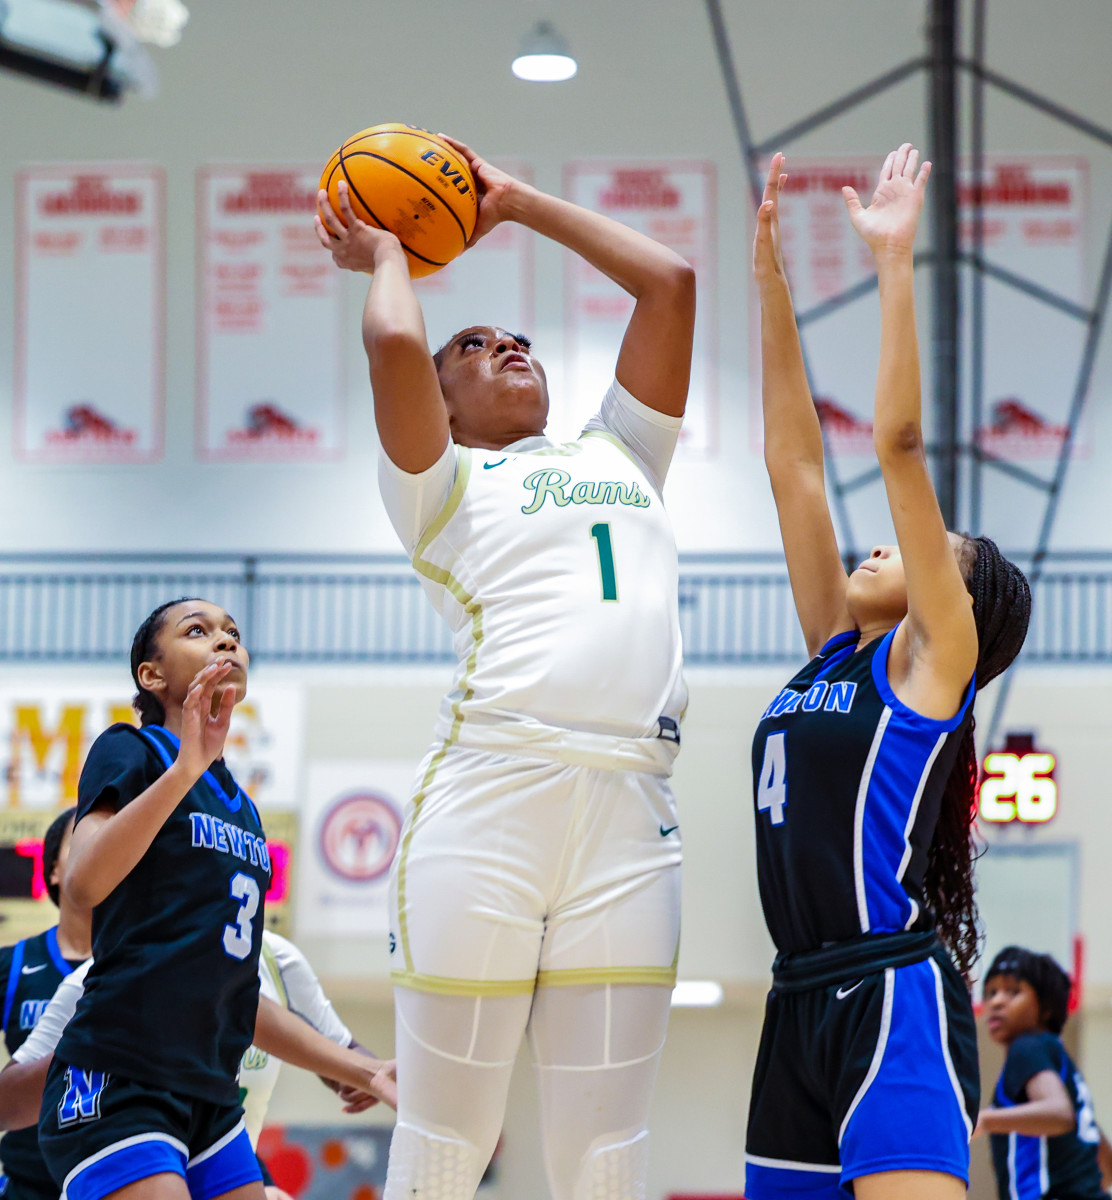 Grayson senior Samara Saunders imposed her will in the paint against Newton, scoring 22 points in the Rams' 71-36 victory in their regular season finale.